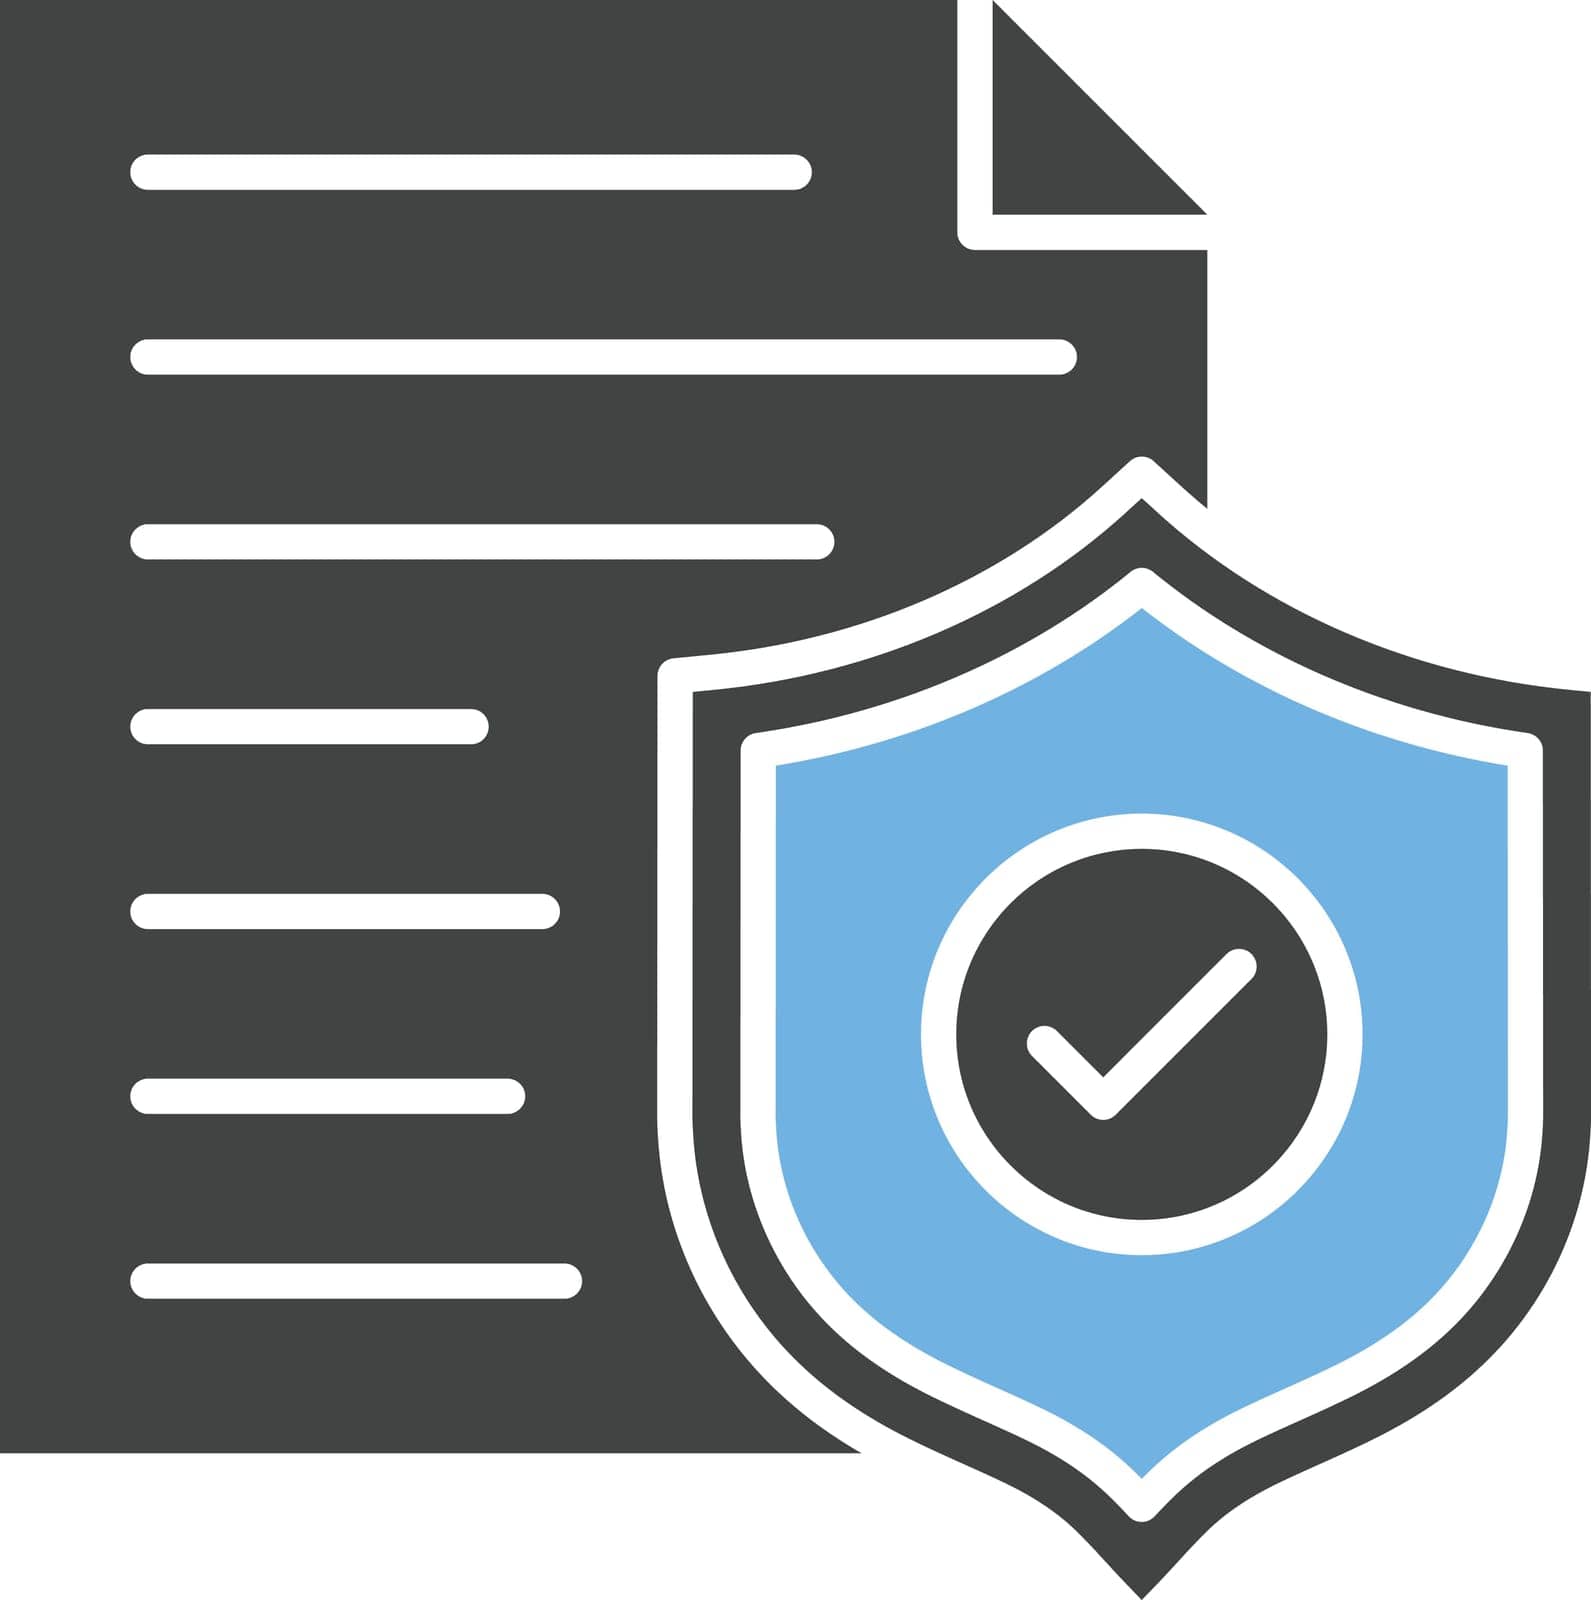 Secure Document icon vector image. by ICONBUNNY